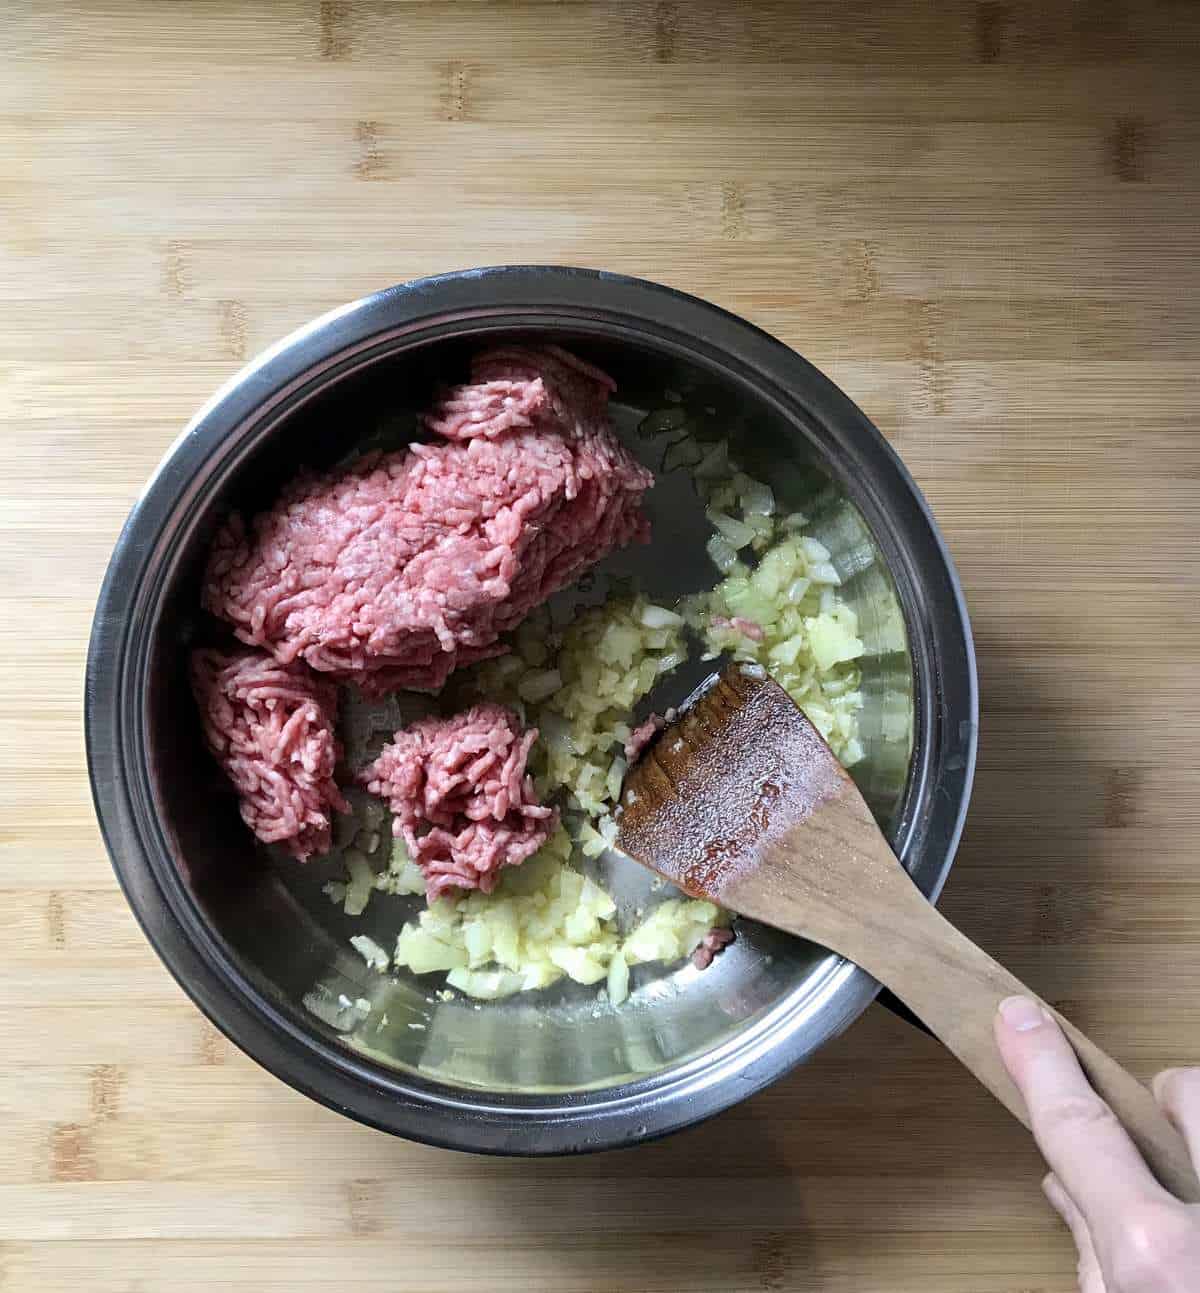 Lean minced meat is sauteed with onions and garlic in a pan.